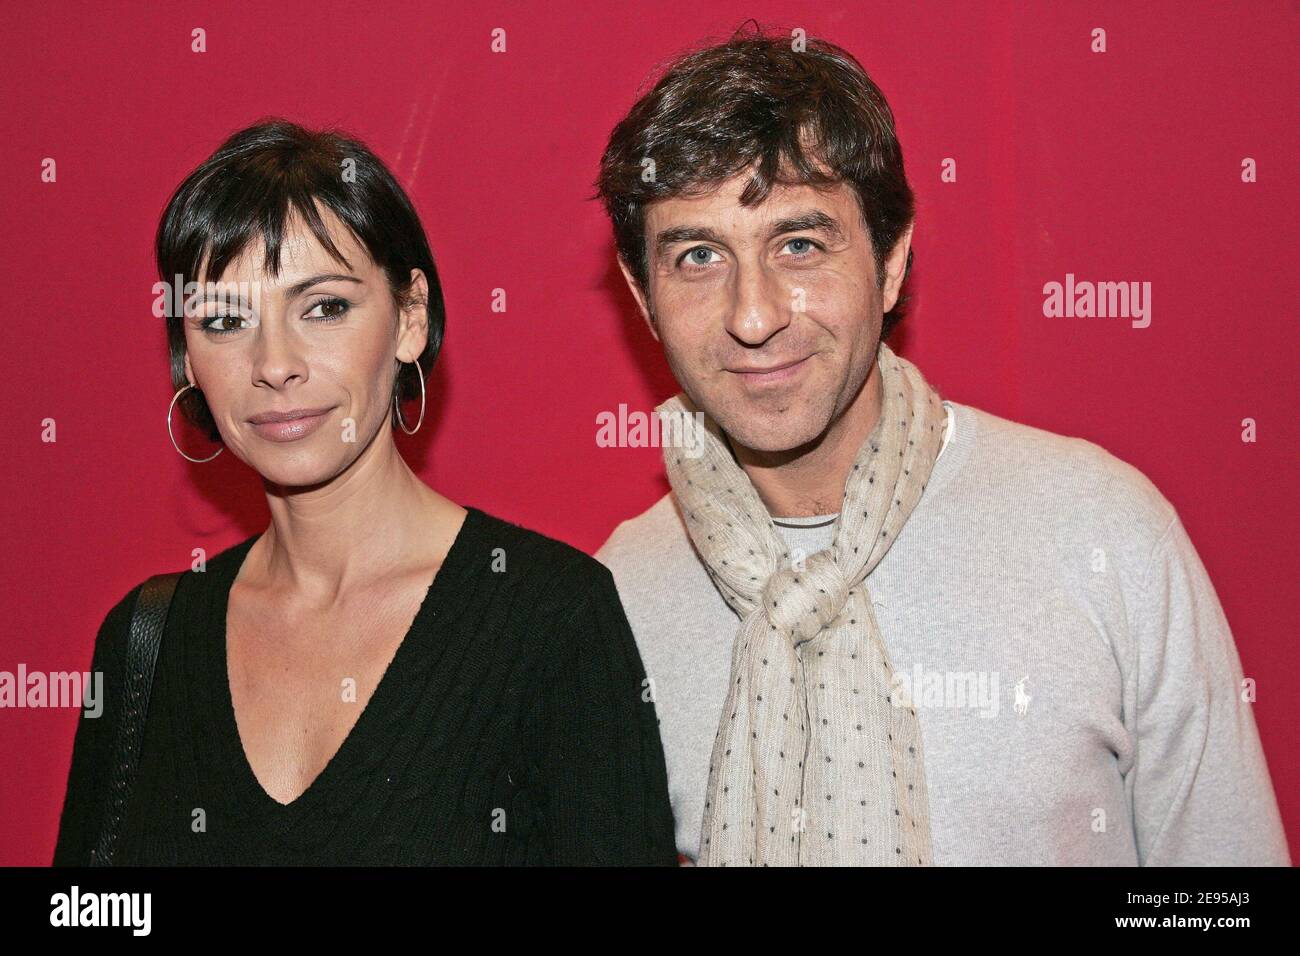 French actress Mathilda May and her husband Philippe Kelly attend the 14th International Massy Circus Festival in Massy, France, on January 14, 2006. Photo by Laurent Zabulon/ABACAPRESS.COM. Stock Photo